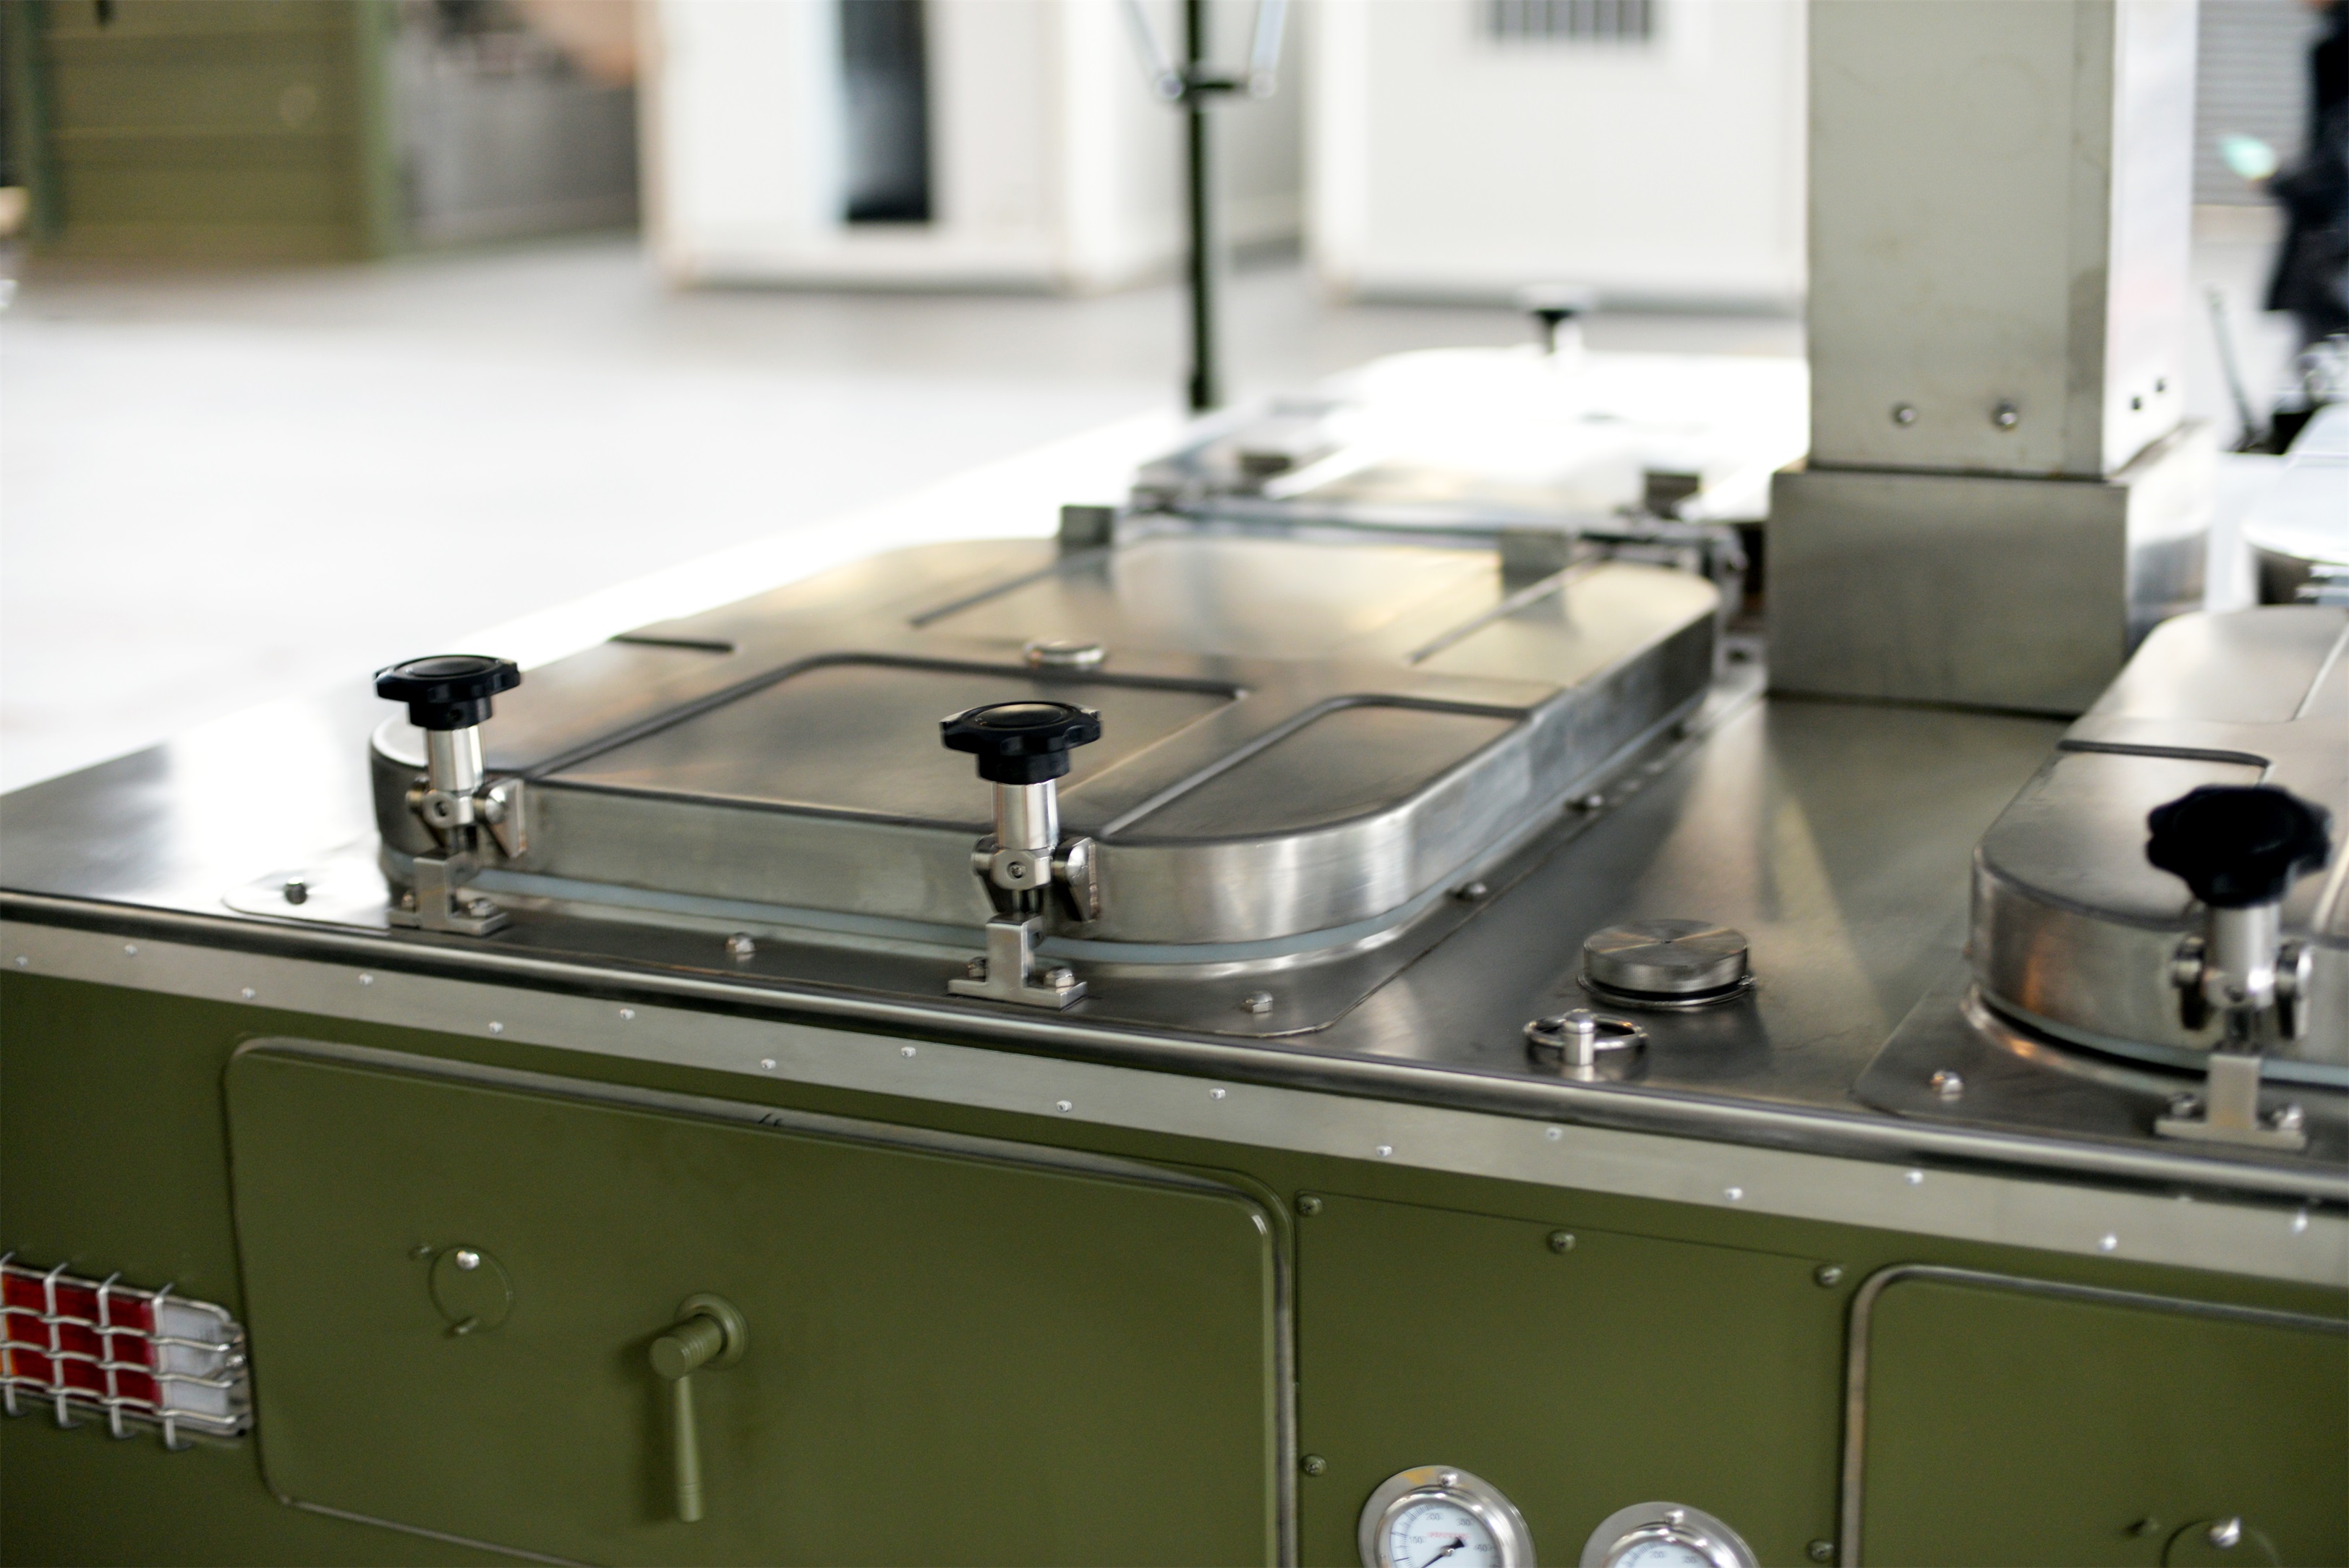 Amry standard mobile field kitchen tailer military mobile kitchen Model XC-250 for western food